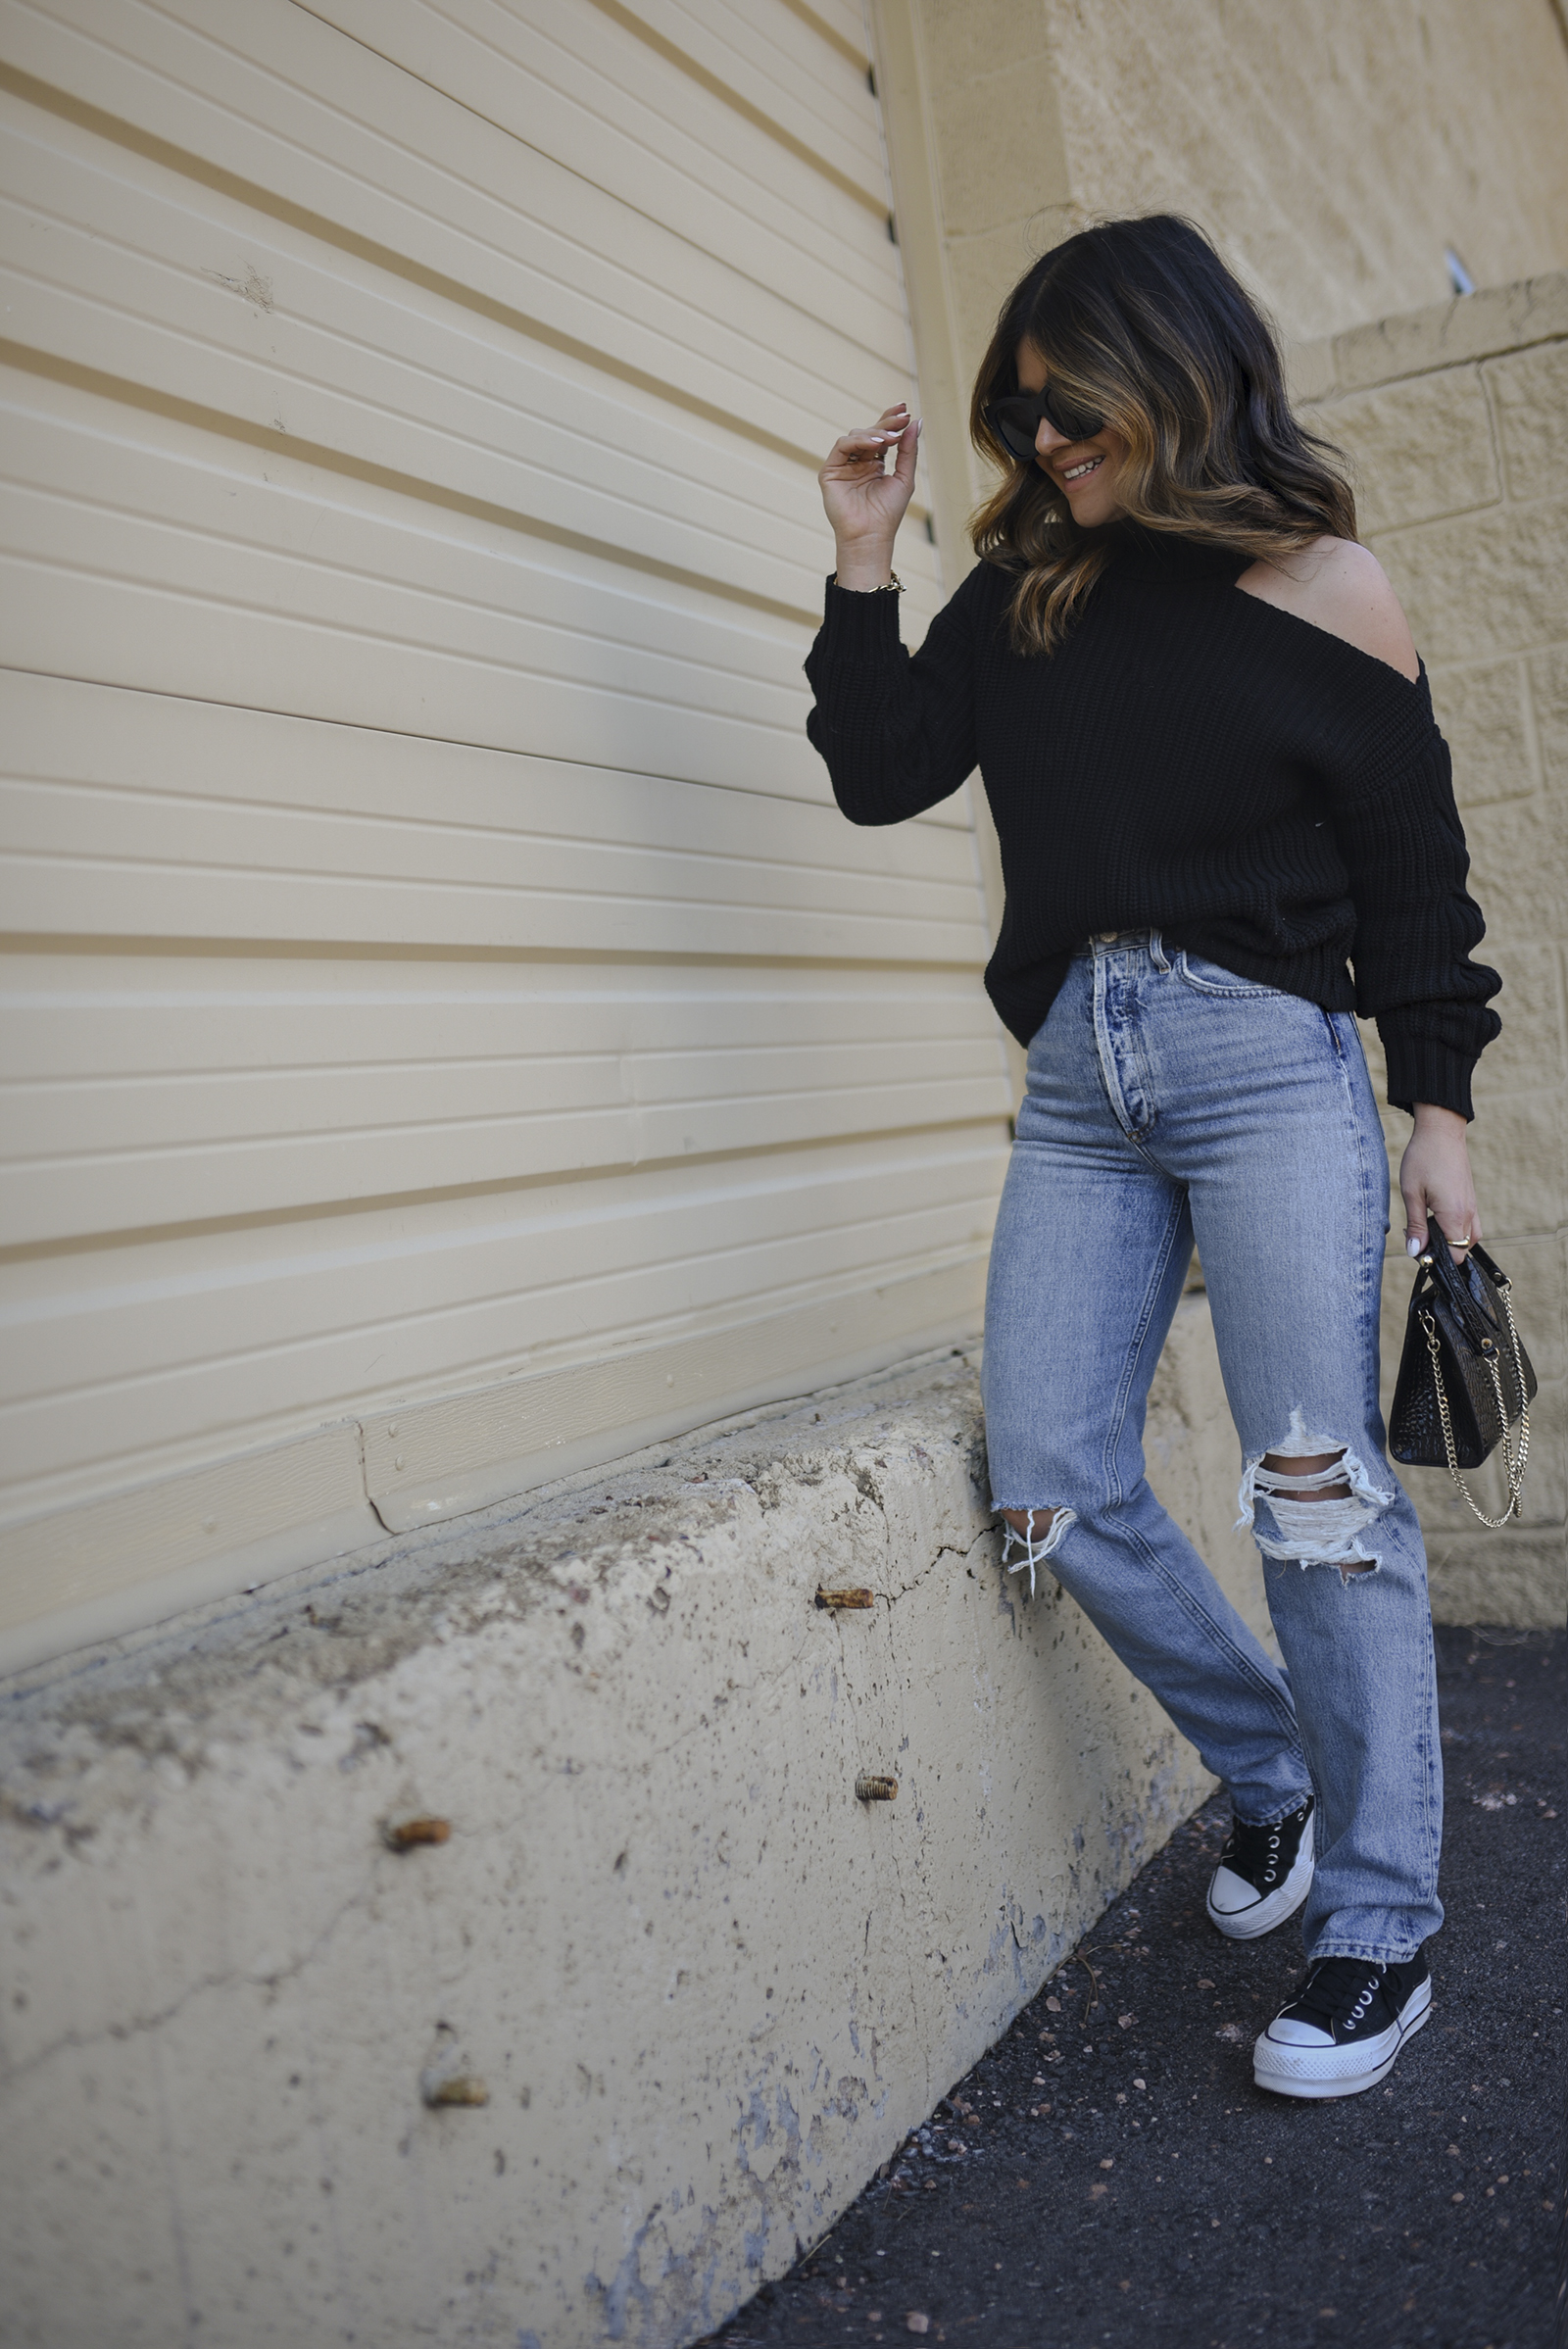 WEEKEND DENIM OUTFIT, CHIC TALK